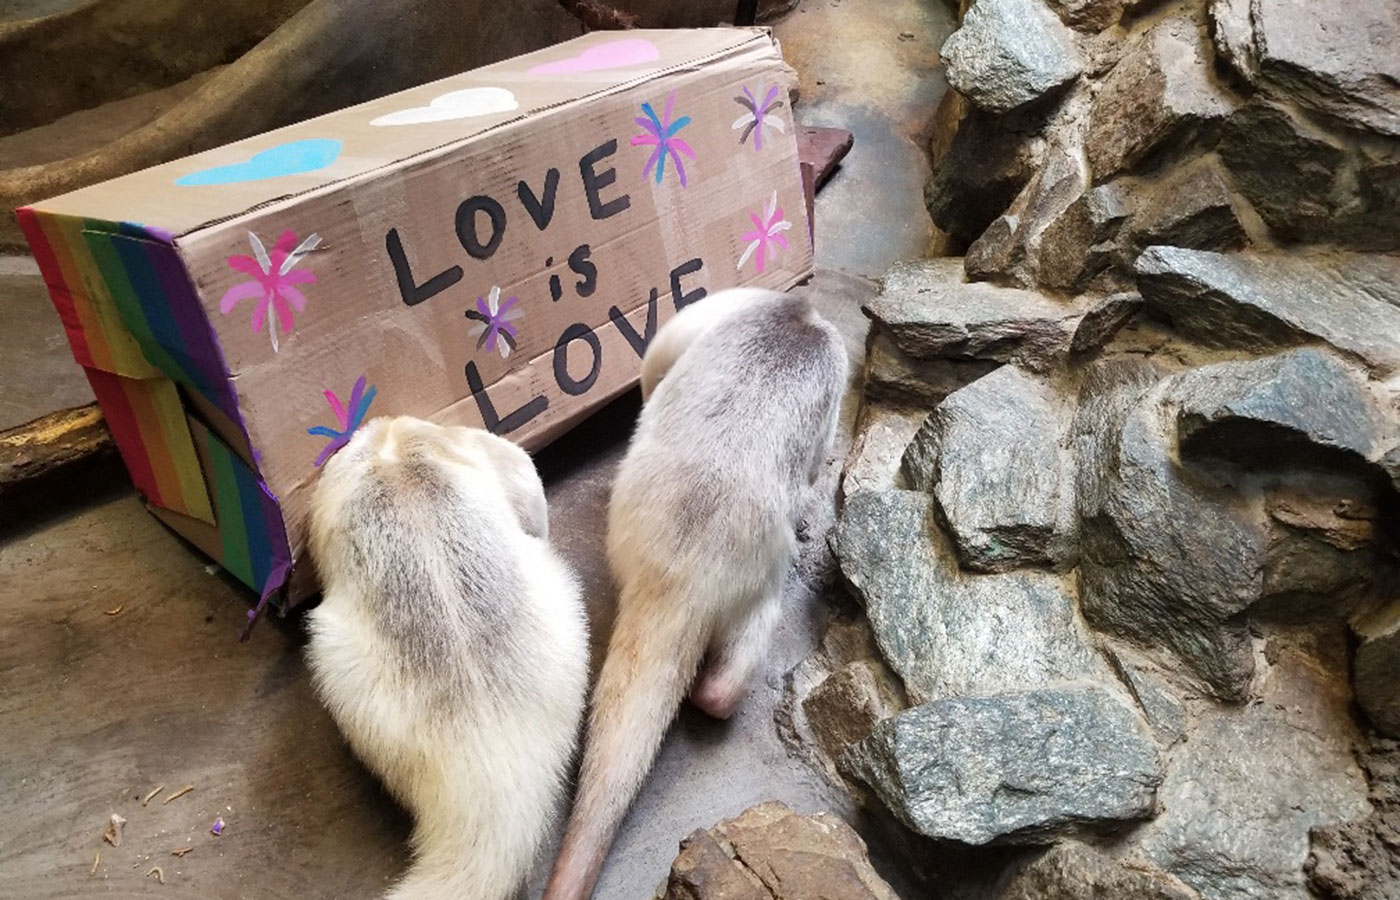 Two tamanduas investigate a box painted with the words "love is love" for International Family Equality Day at the Zoo